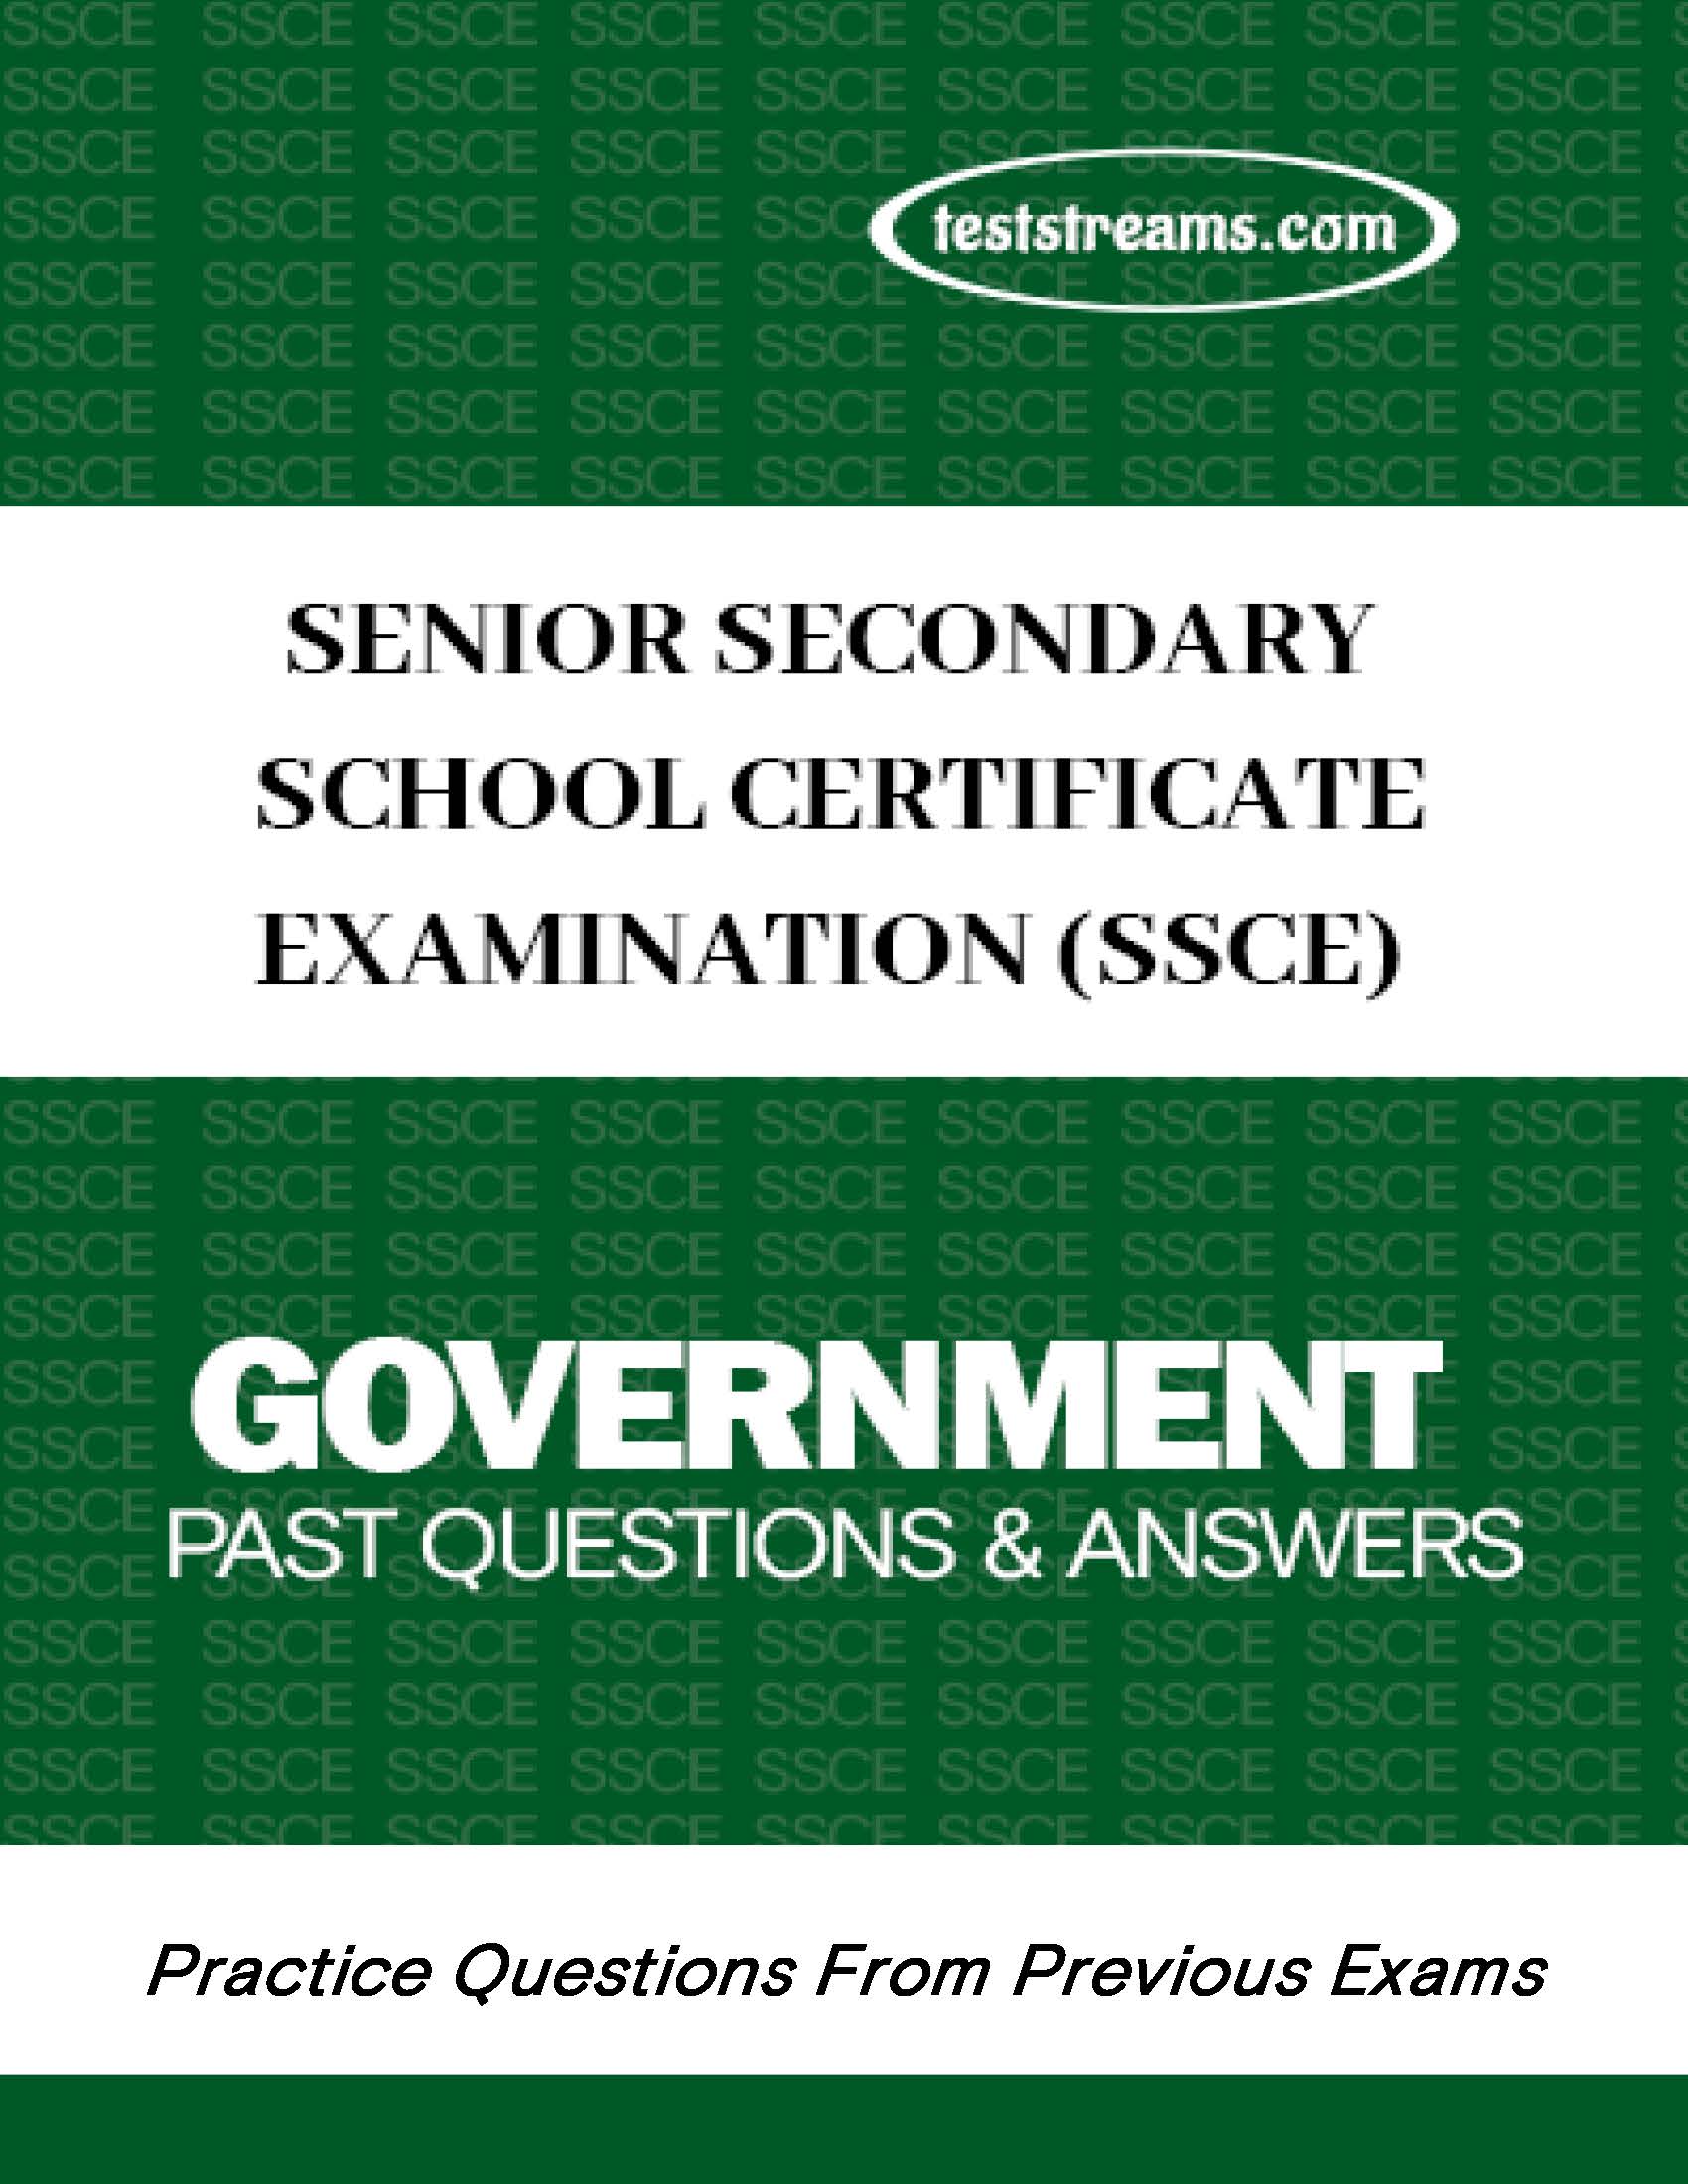 SSCE Government Practice Questions and Answers MS-WORD/PDF Download